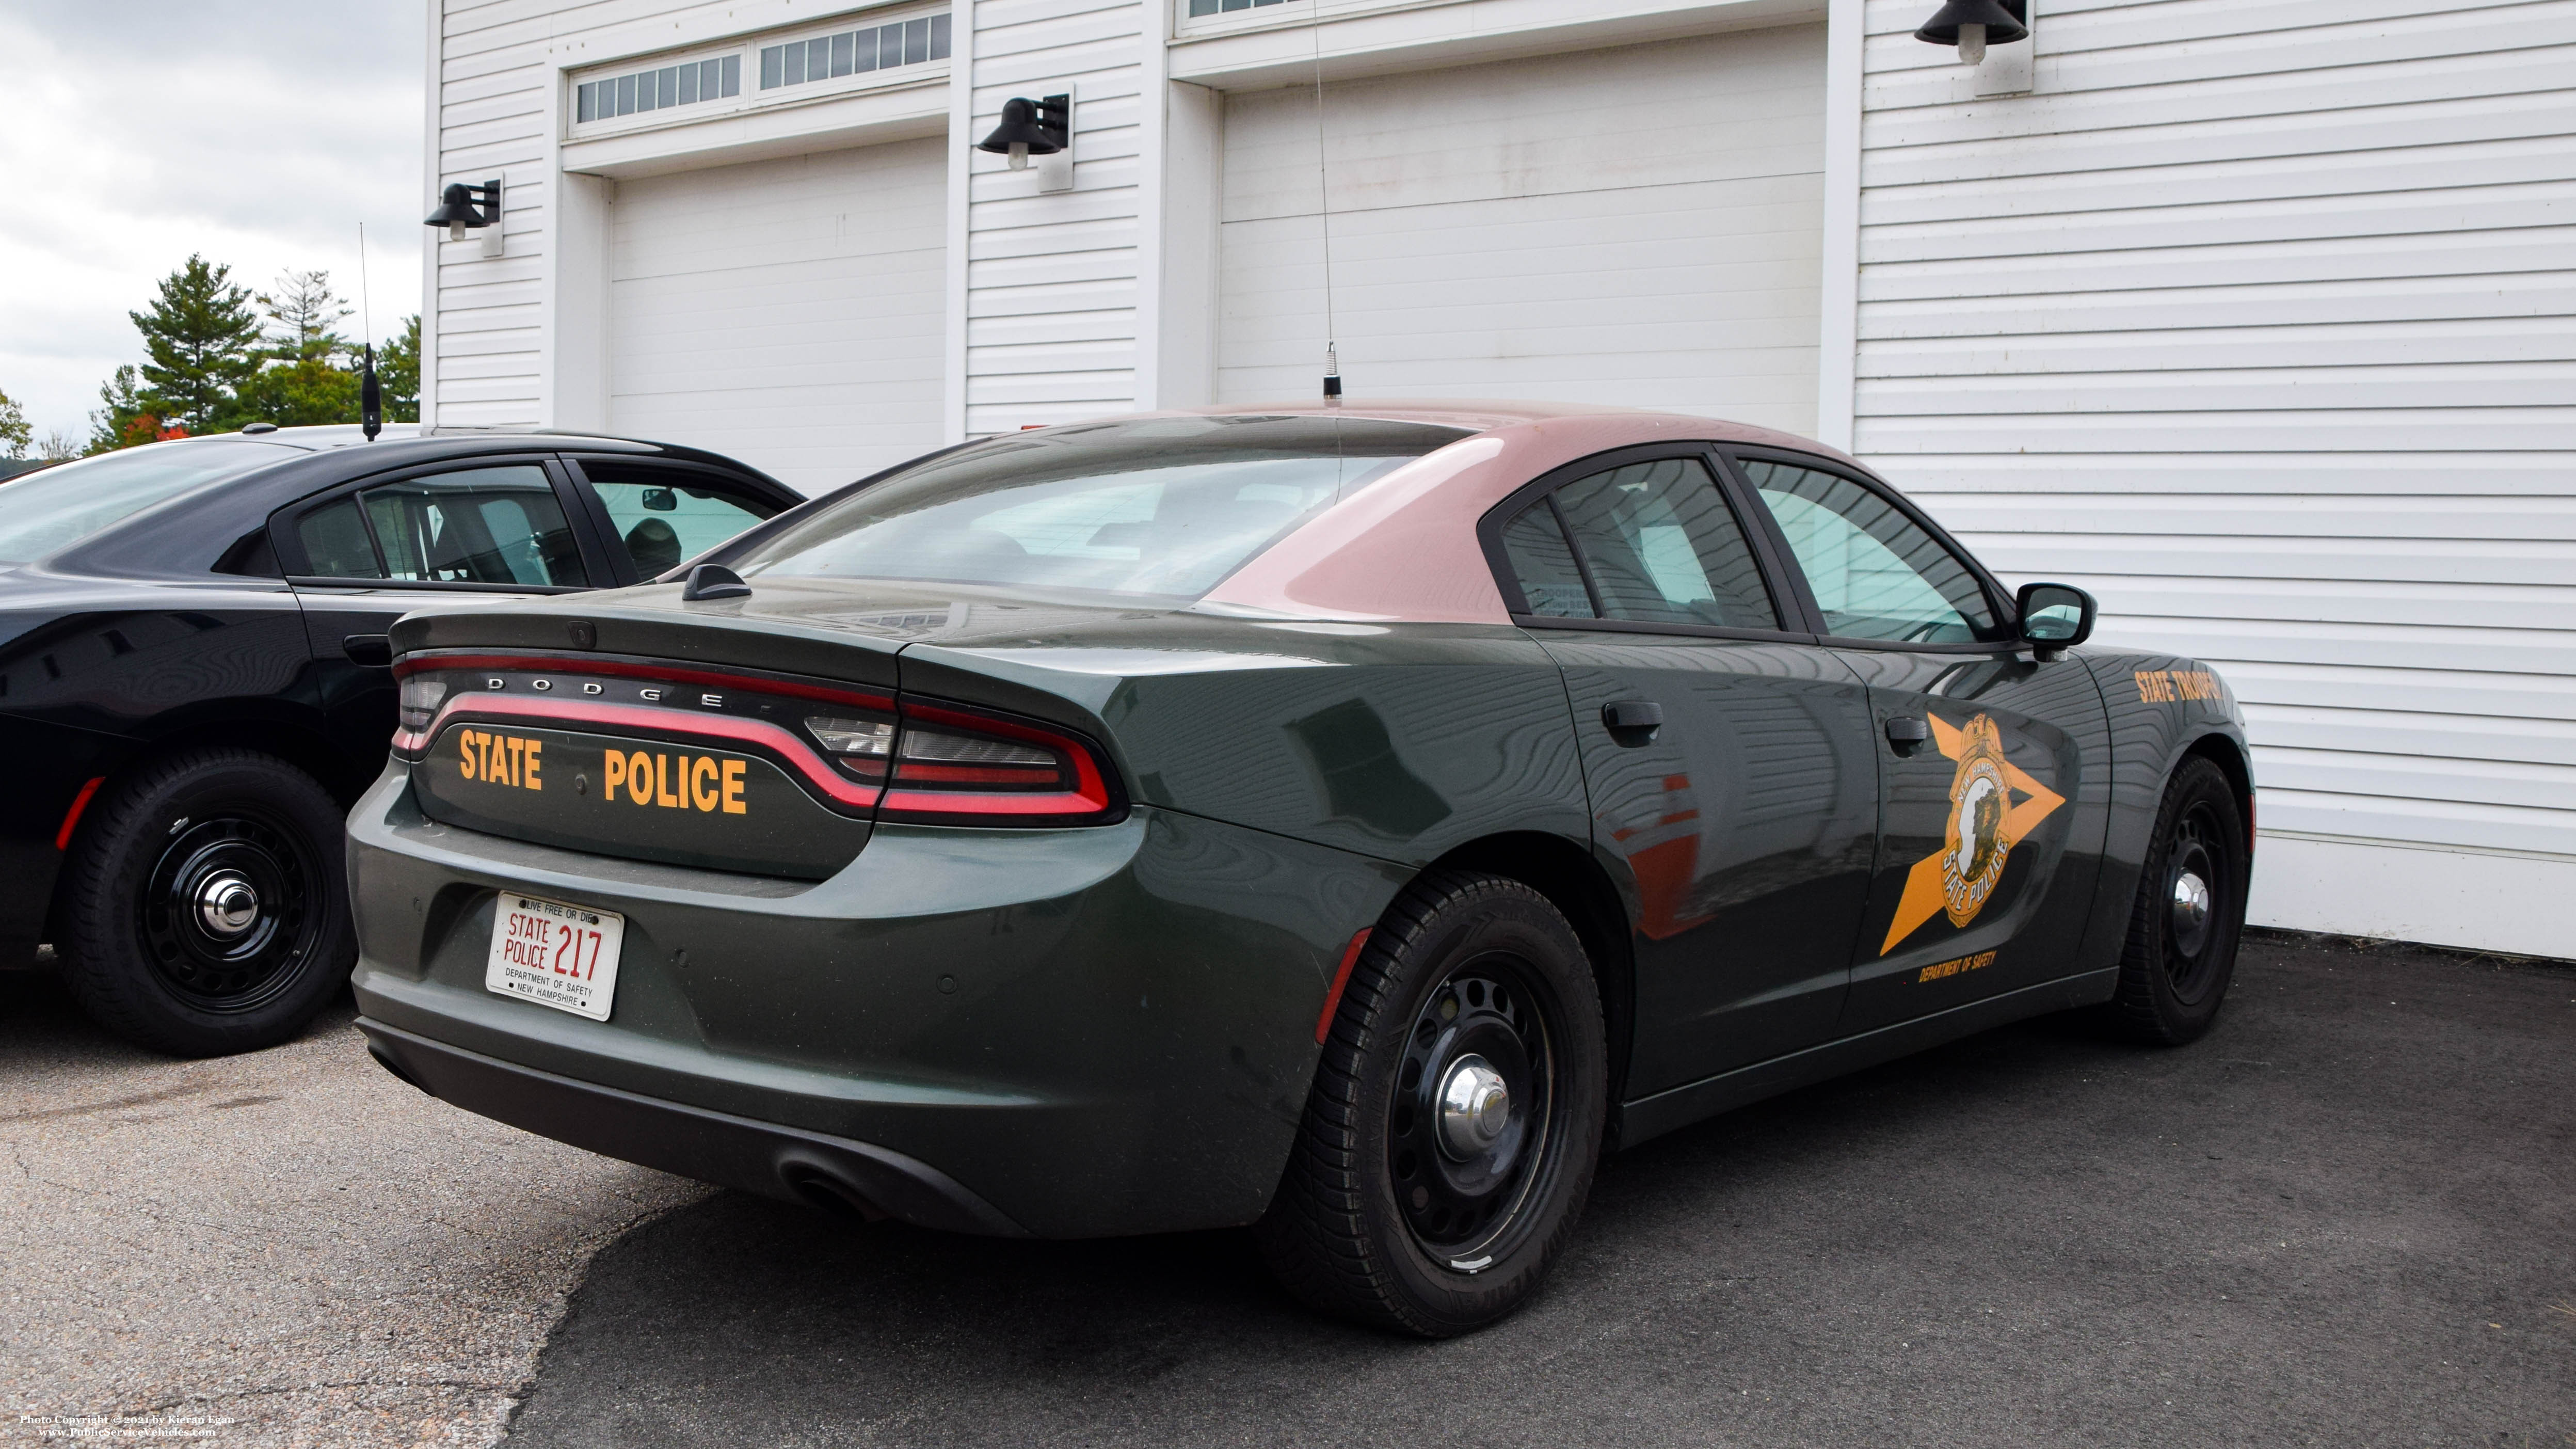 A photo  of New Hampshire State Police
            Cruiser 217, a 2015-2019 Dodge Charger             taken by Kieran Egan